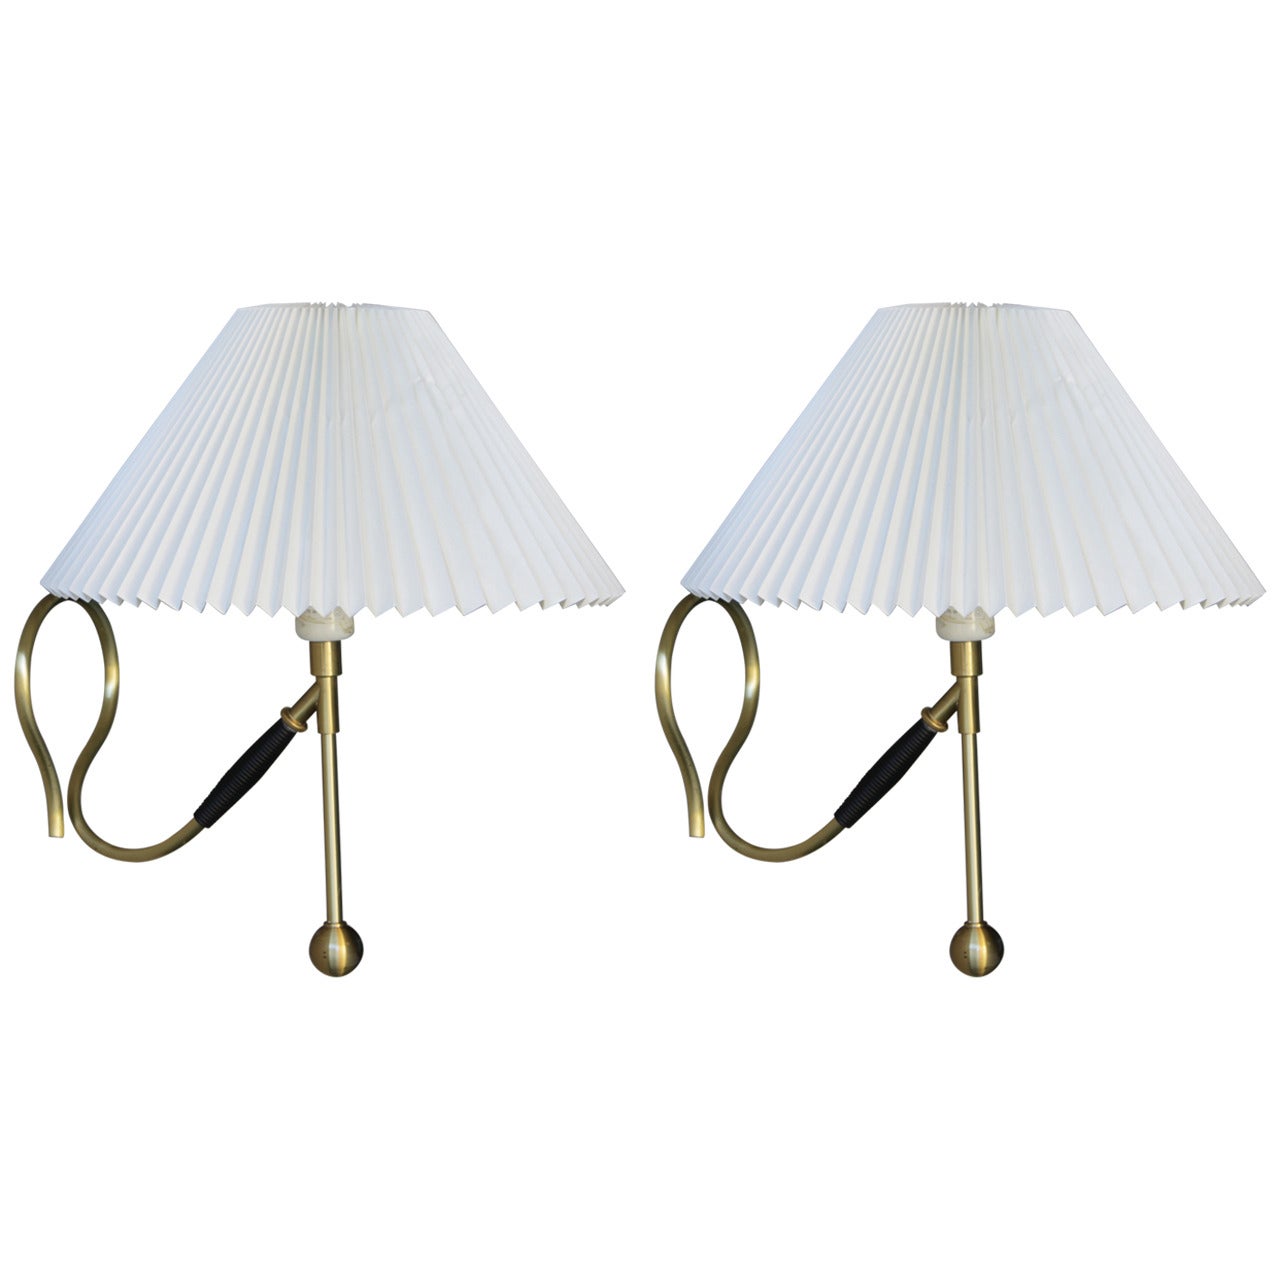 Pair of Lamps by Kaare Klint for Le Klint